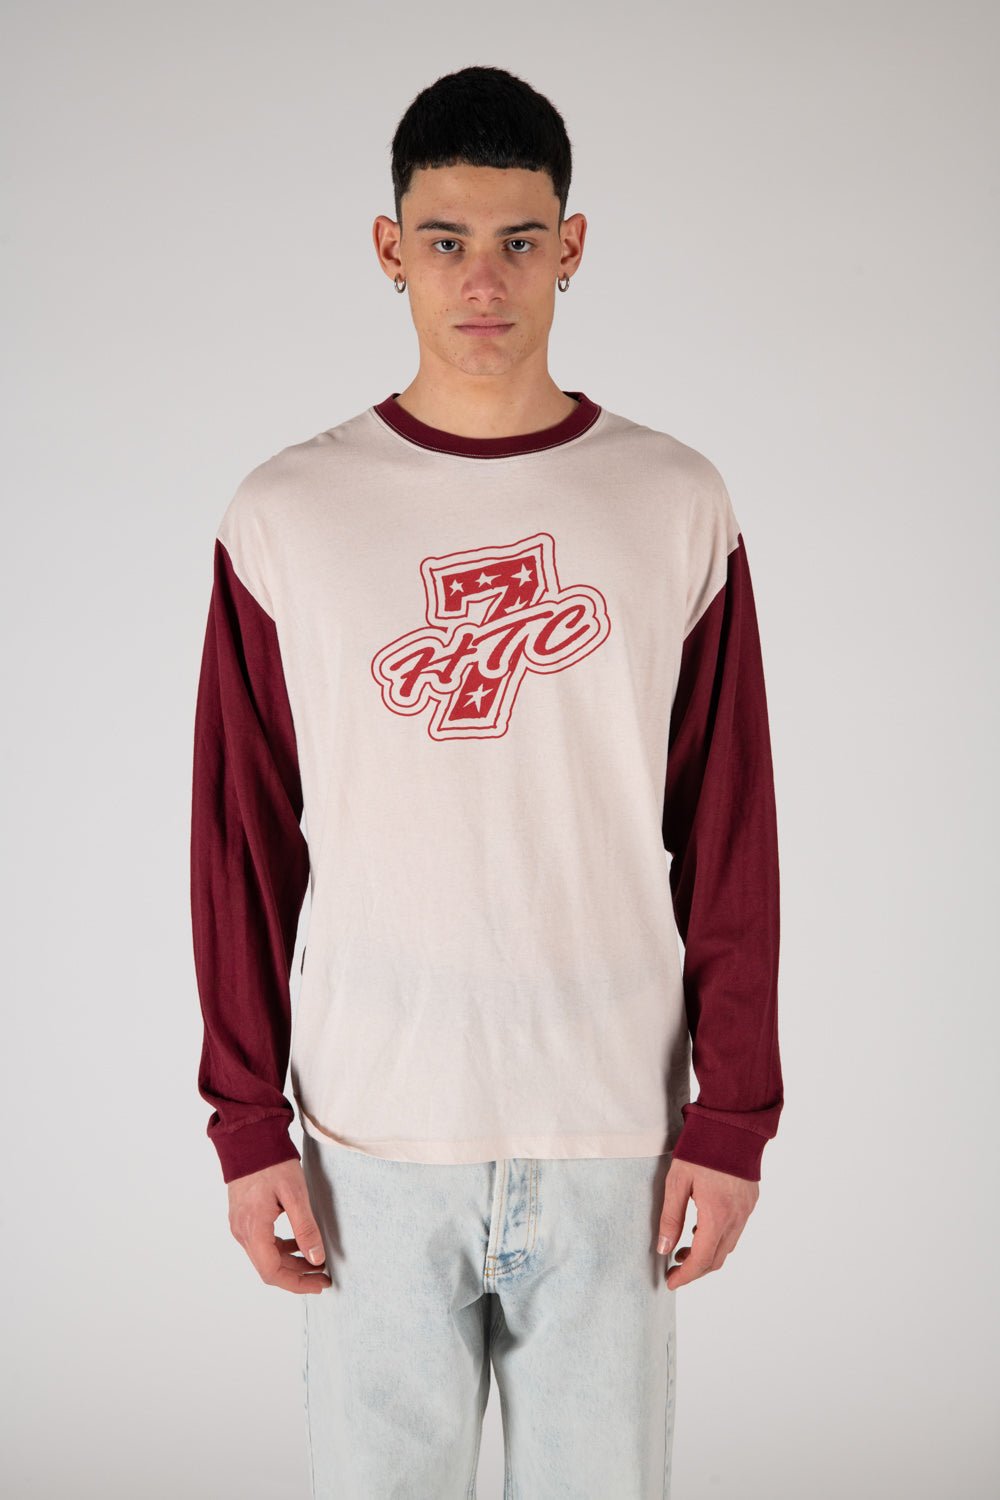 LUCKY KID - AKA7 Regular fit long sleeve t-shirt printed on the front. Composition: 100% Cotton HTC LOS ANGELES